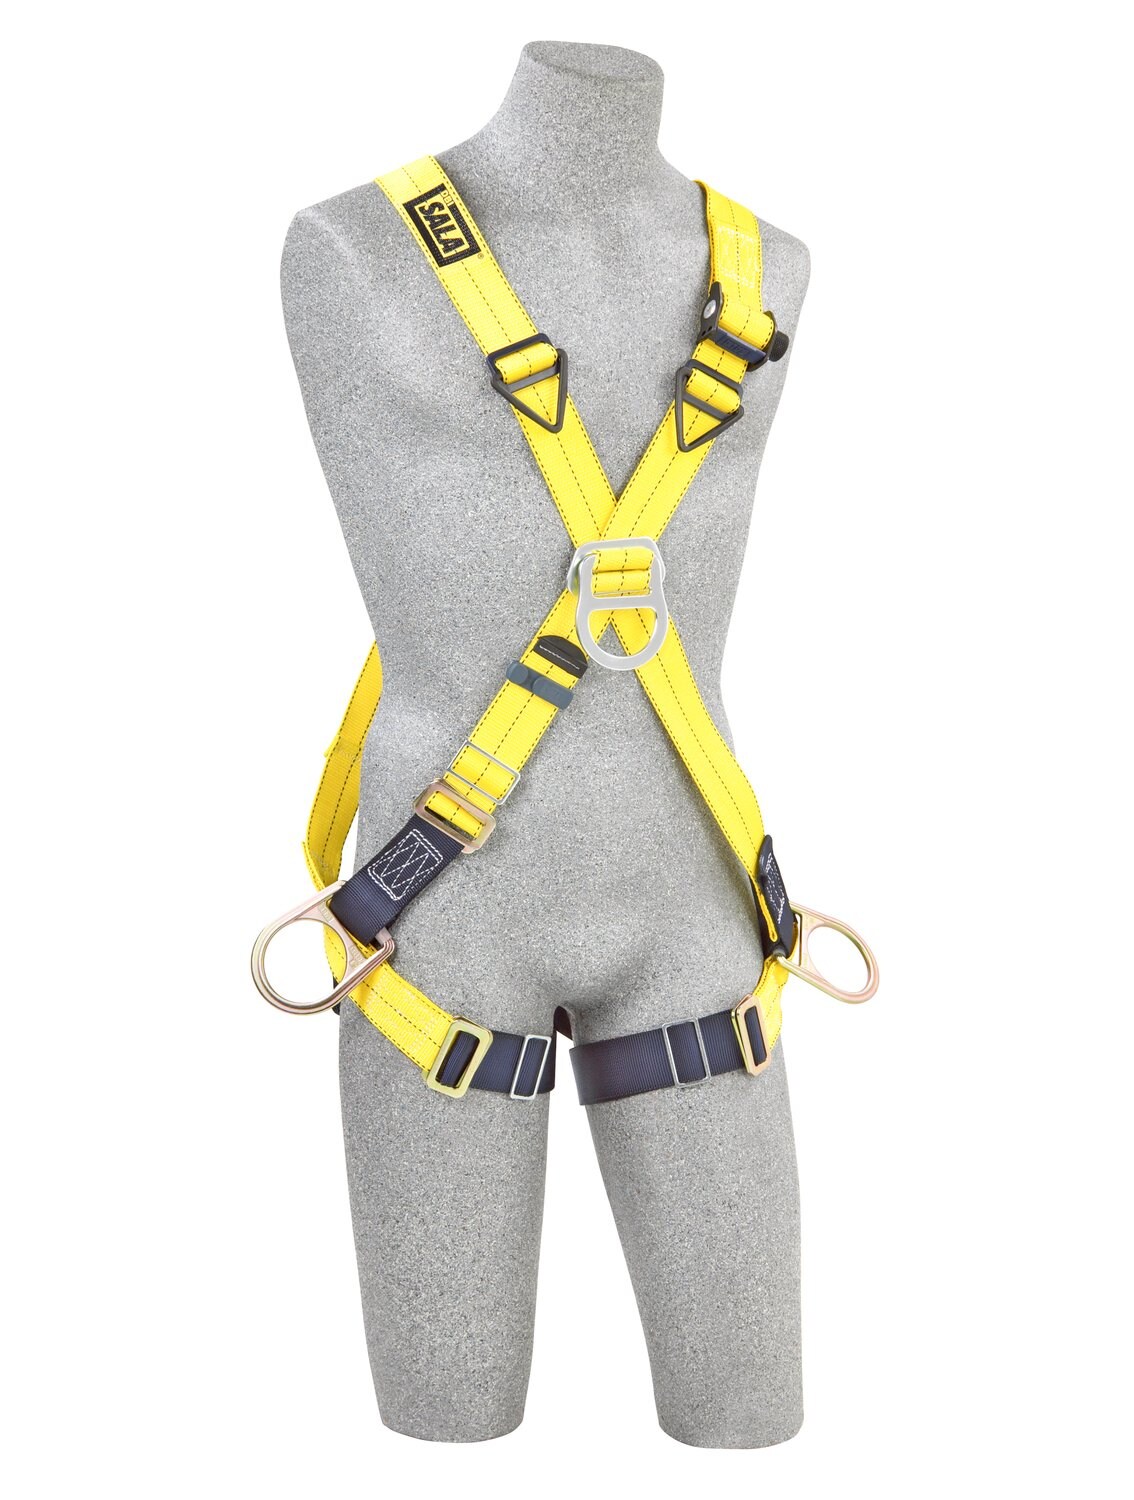 7012815446 - 3M DBI-SALA Delta Cross-Over Climbing/Positioning Safety Harness 1103255, 3X